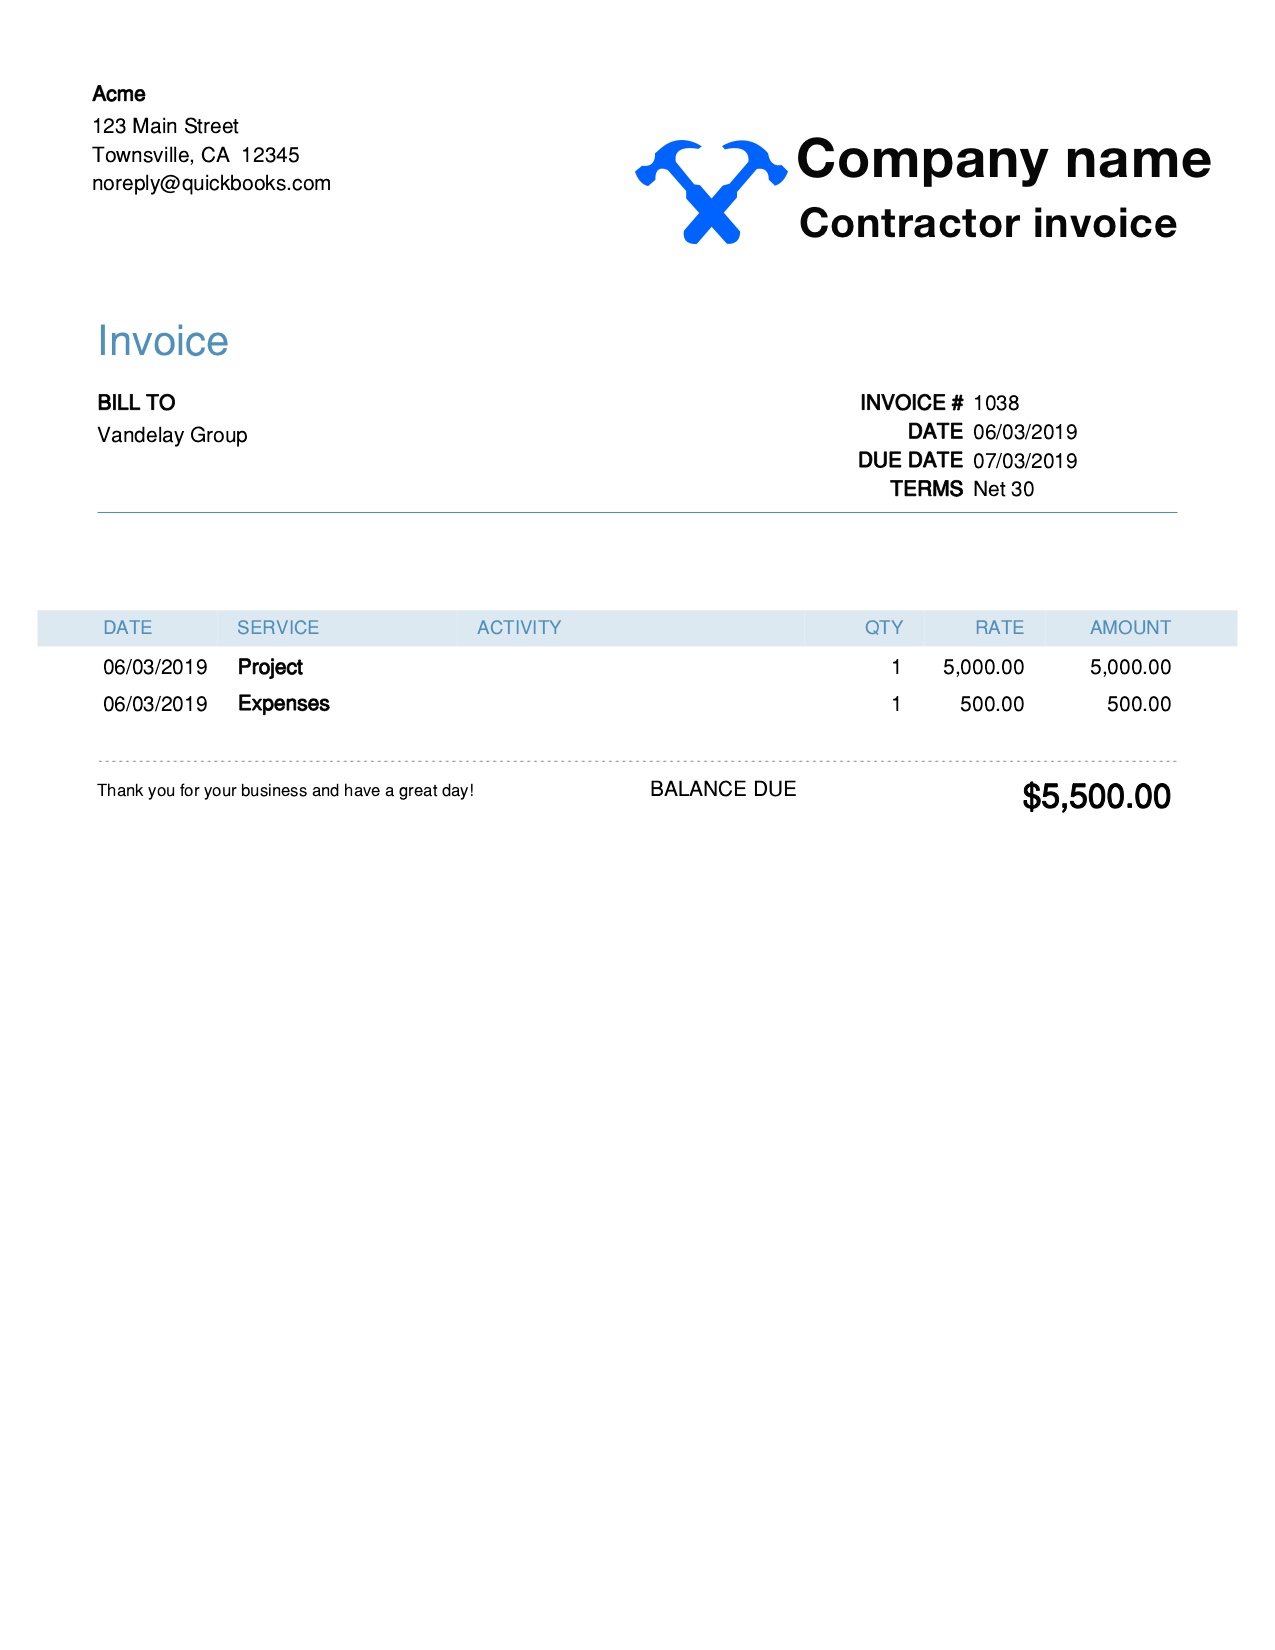 Free Contractor Invoice Template Customize And Send In 90 Seconds